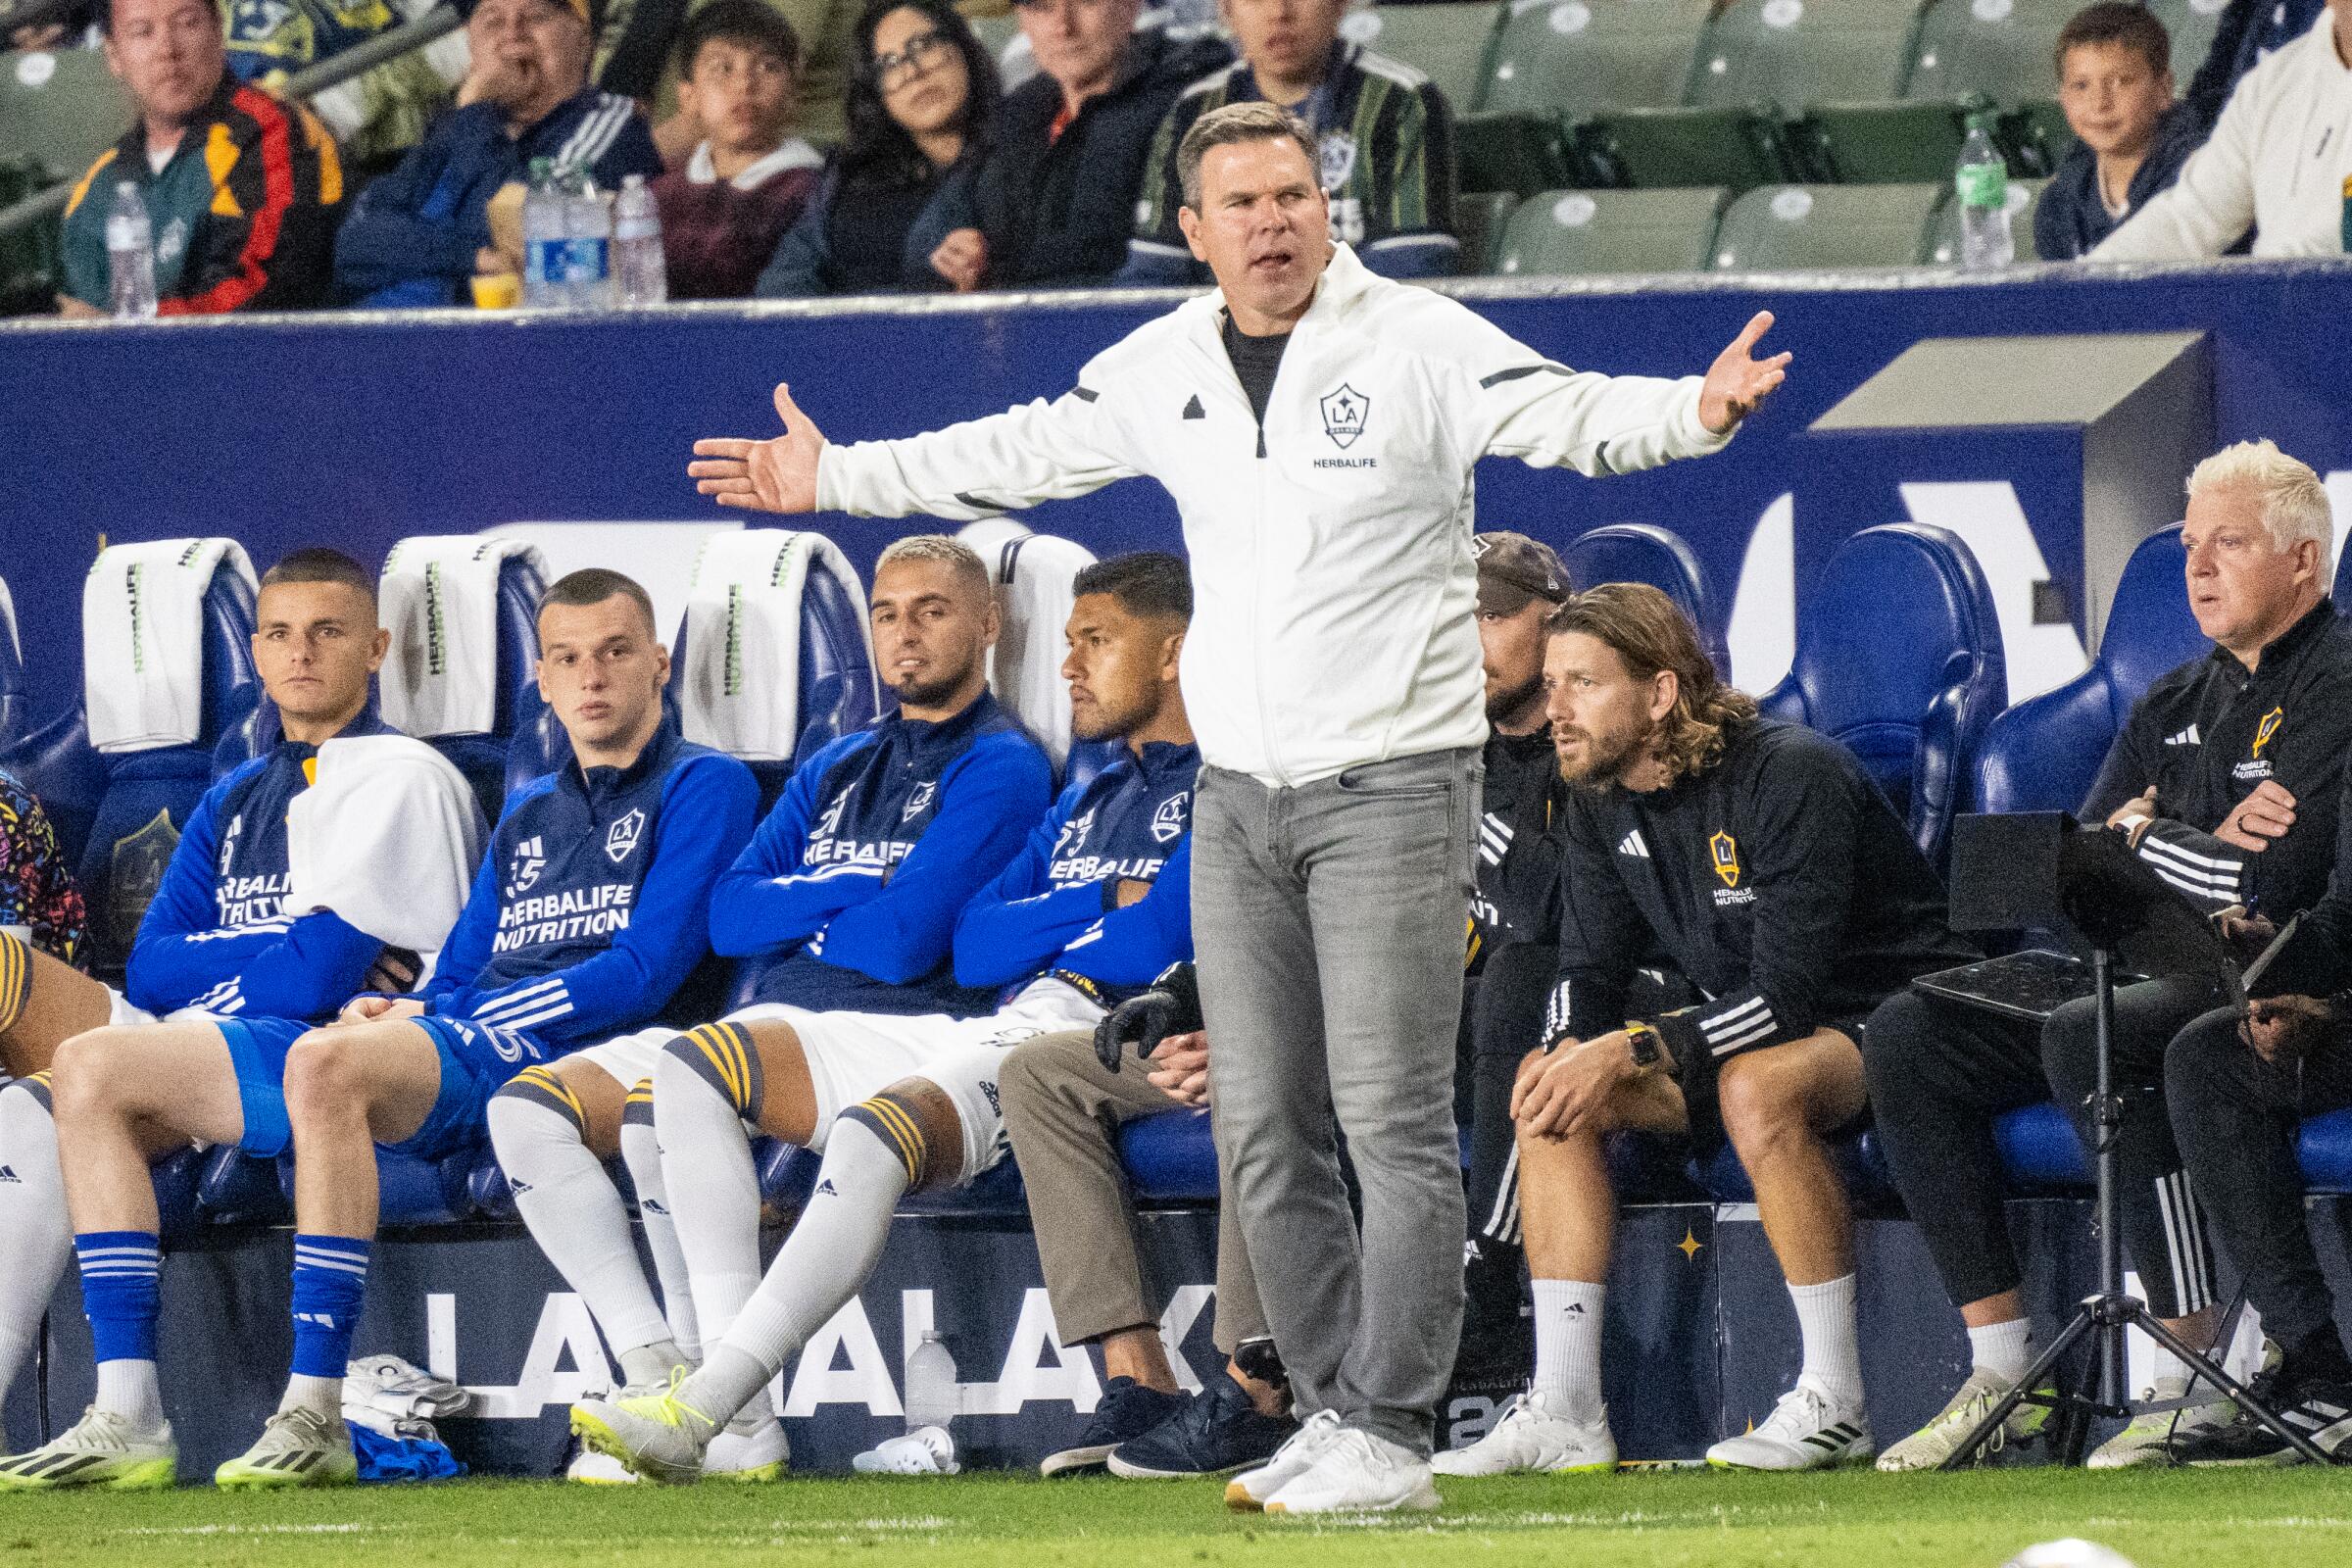 Galaxy coach Greg Vanney complains during a match against the Portland Timbers in September.